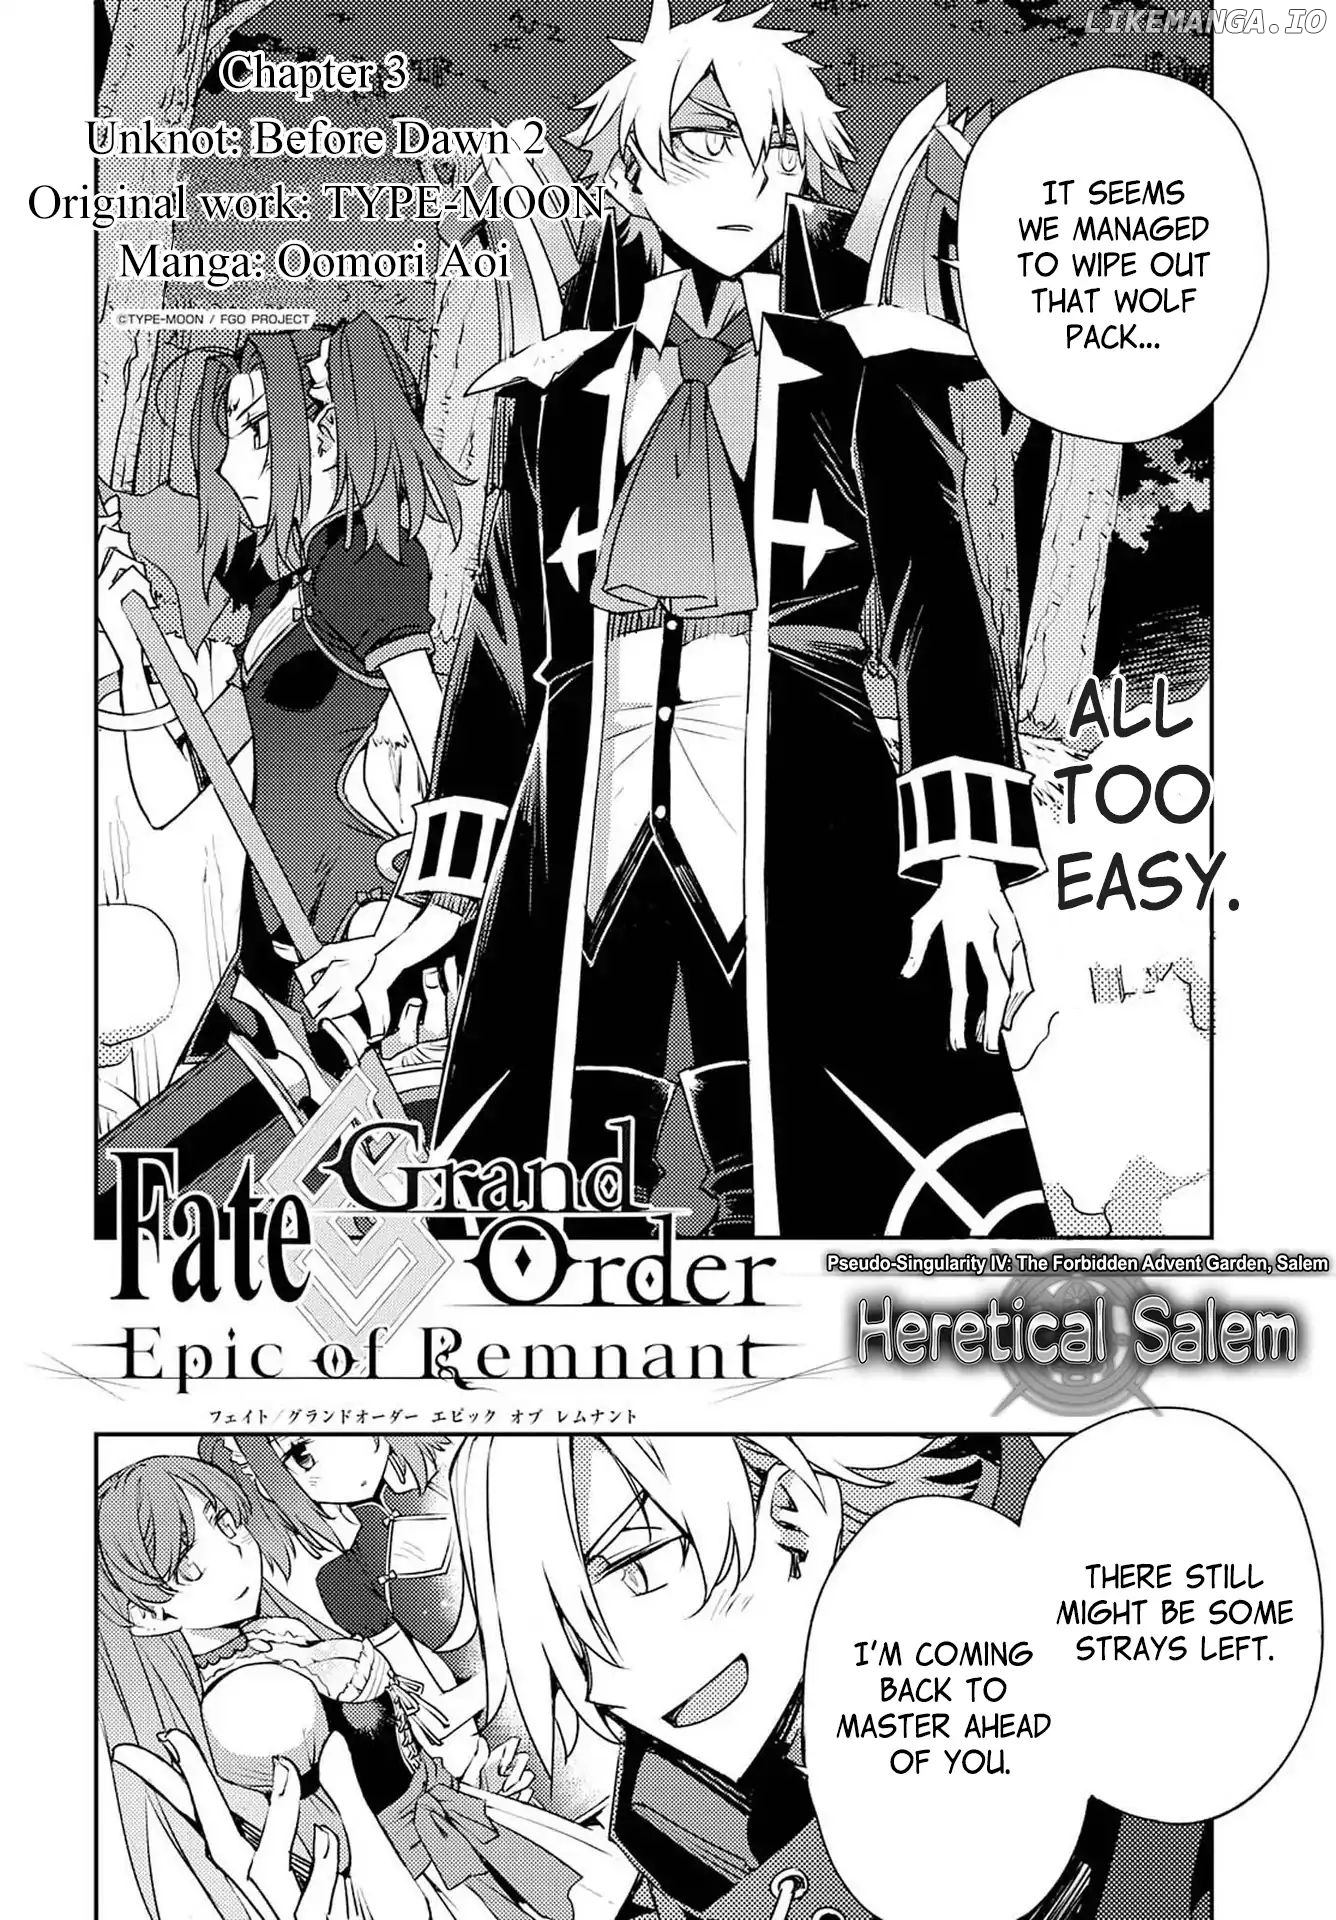 Fate/Grand Order: Epic of Remnant - Subspecies Singularity IV: Taboo Advent Salem: Salem of Heresy chapter 3 - page 4